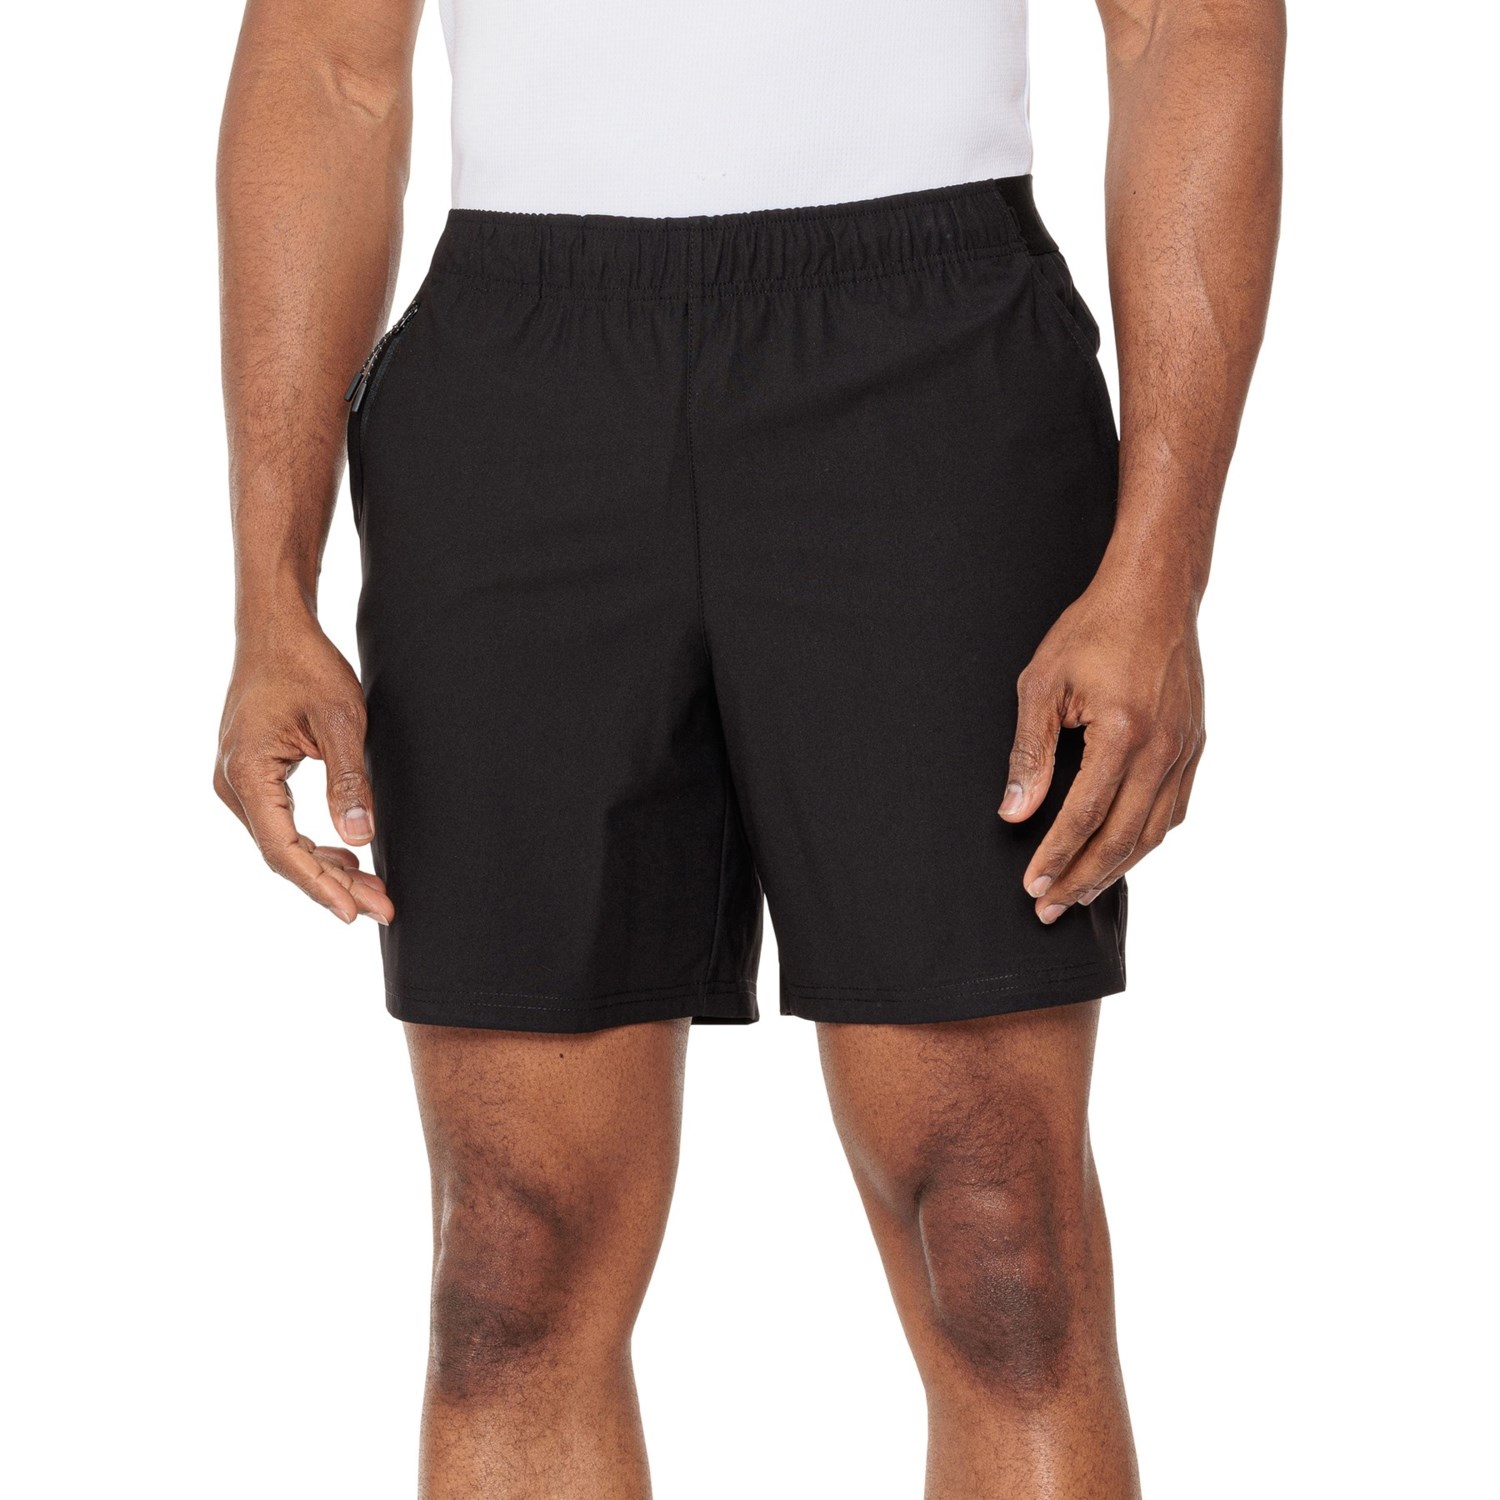 MOTION Ultimate Commuter Shorts - 7” - Save 43%